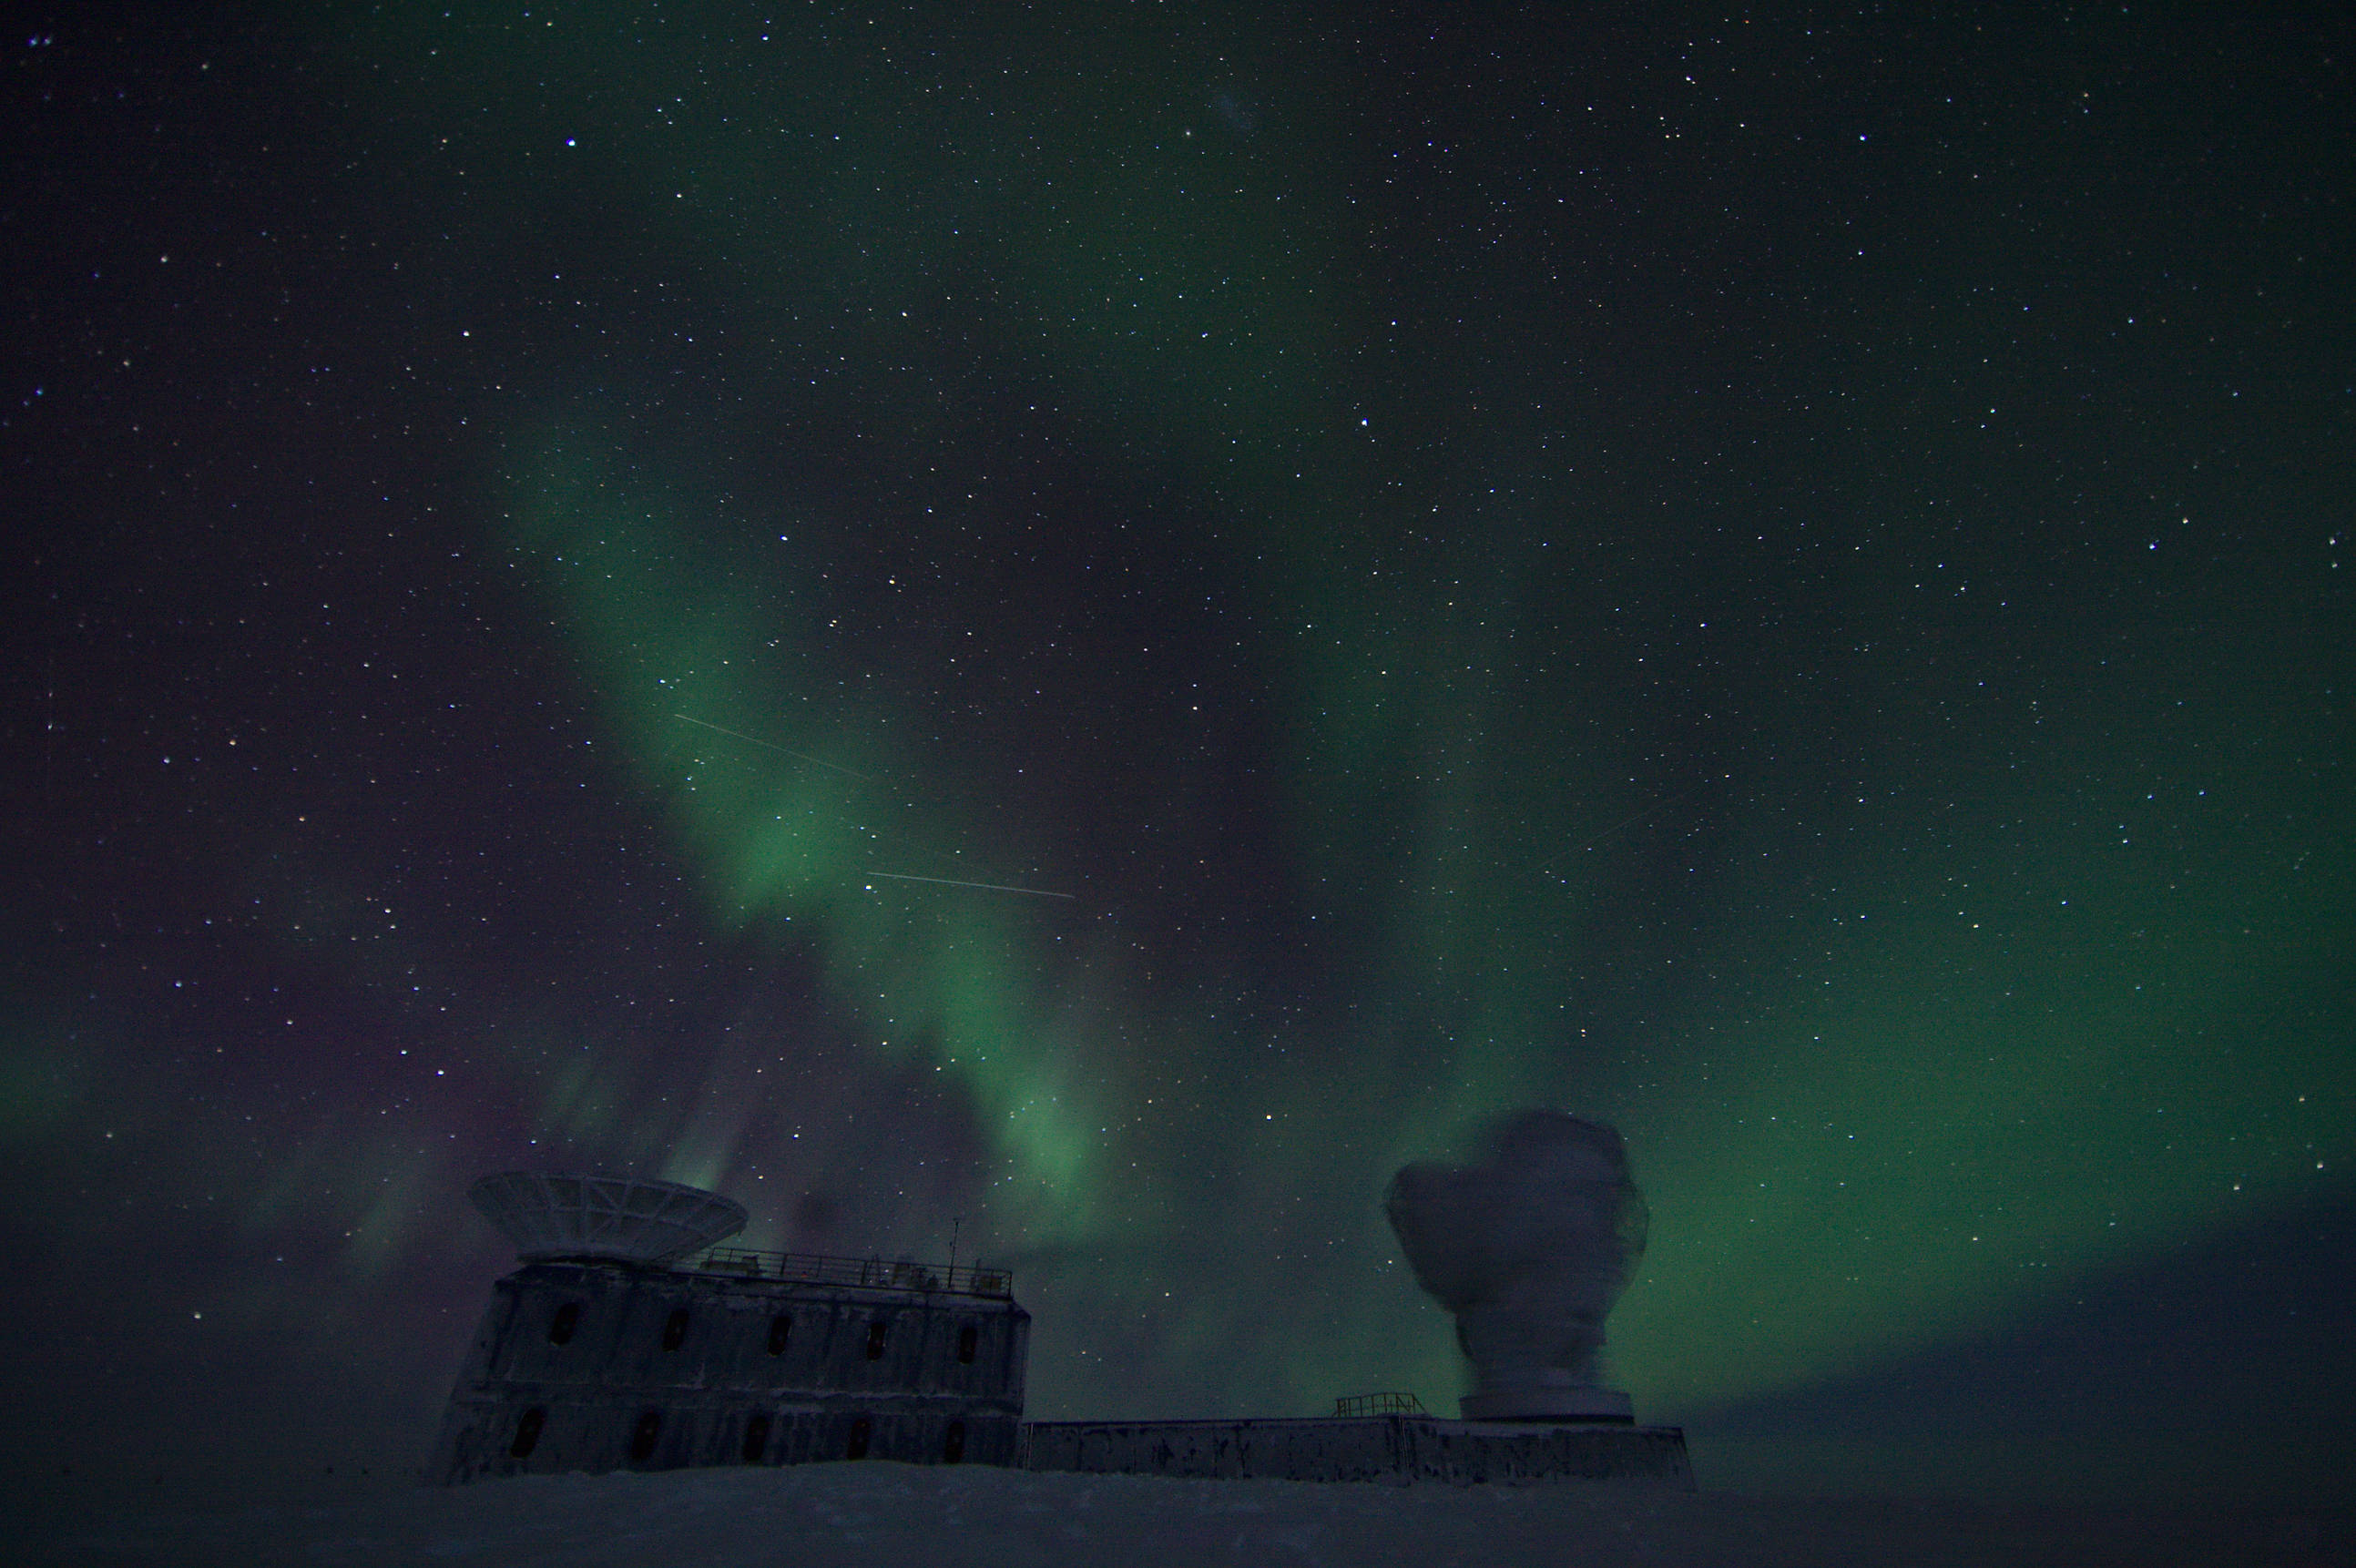 Auroras illuminate the sky while the South Pole Telescope performs CMB field observations. The Small Magellanic Cloud is visible in the very top of the picture.